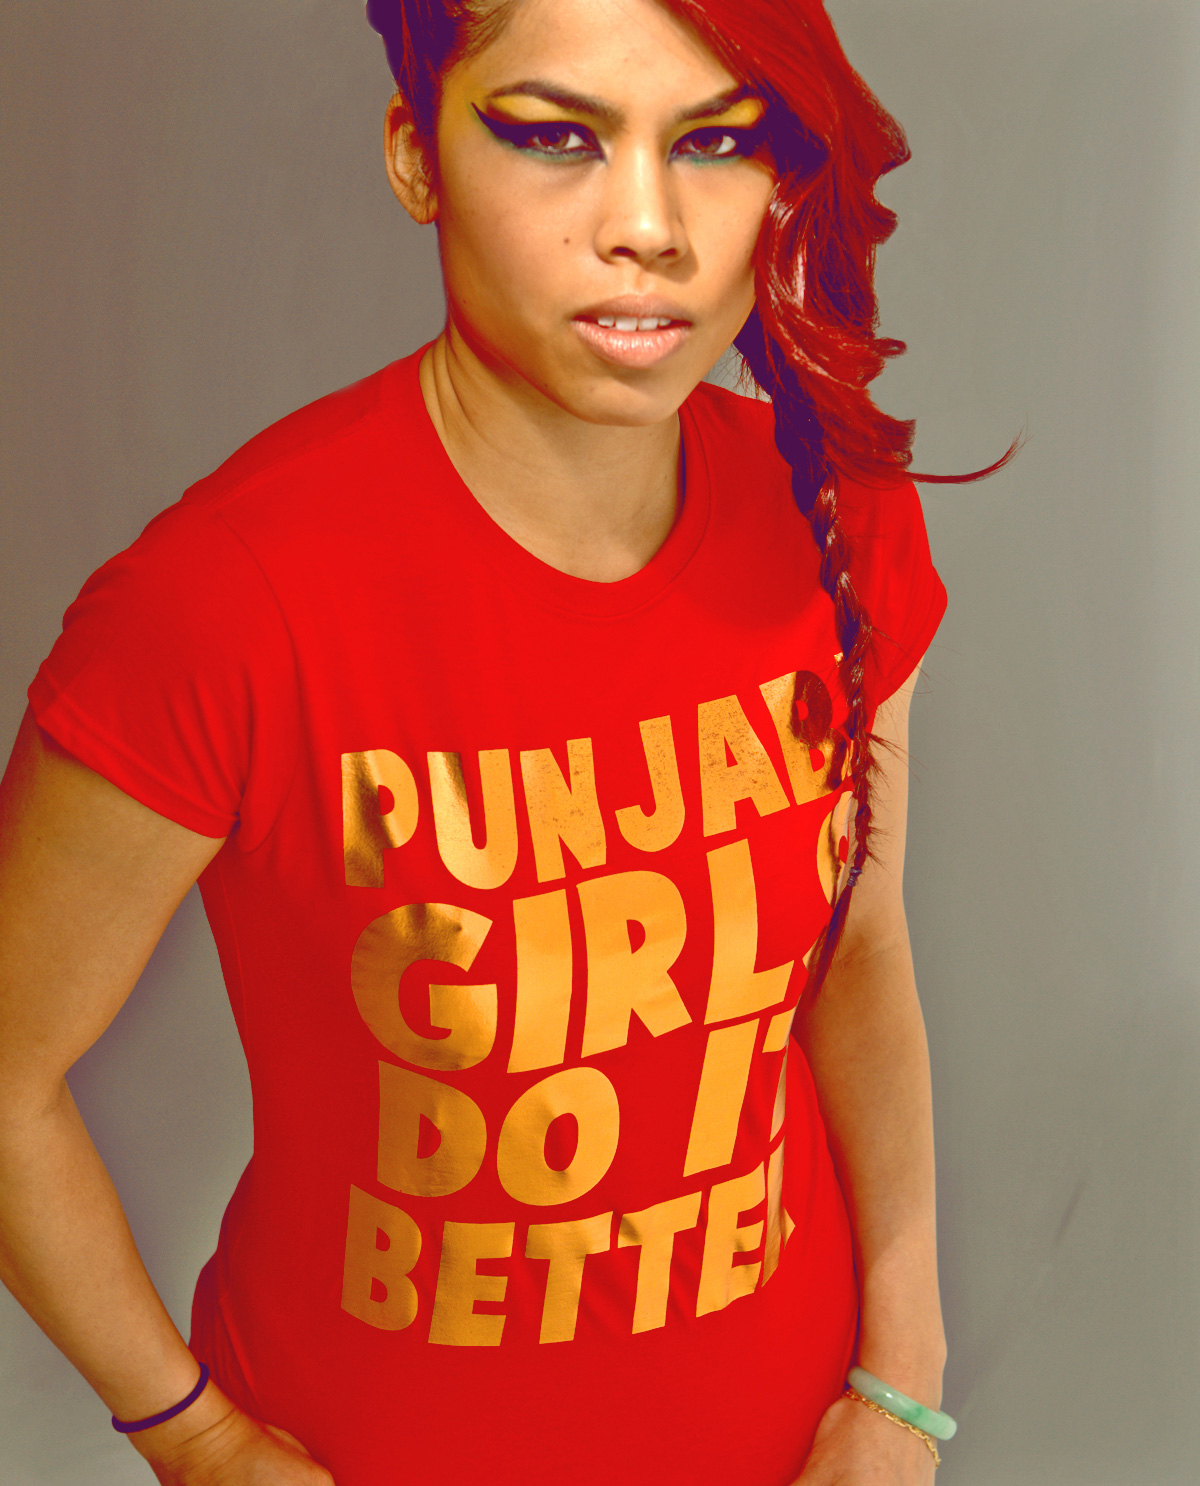 Punjabi Girls Do It Better Copper Foil t.shirt printed on SoftStyle Red T.shirt.